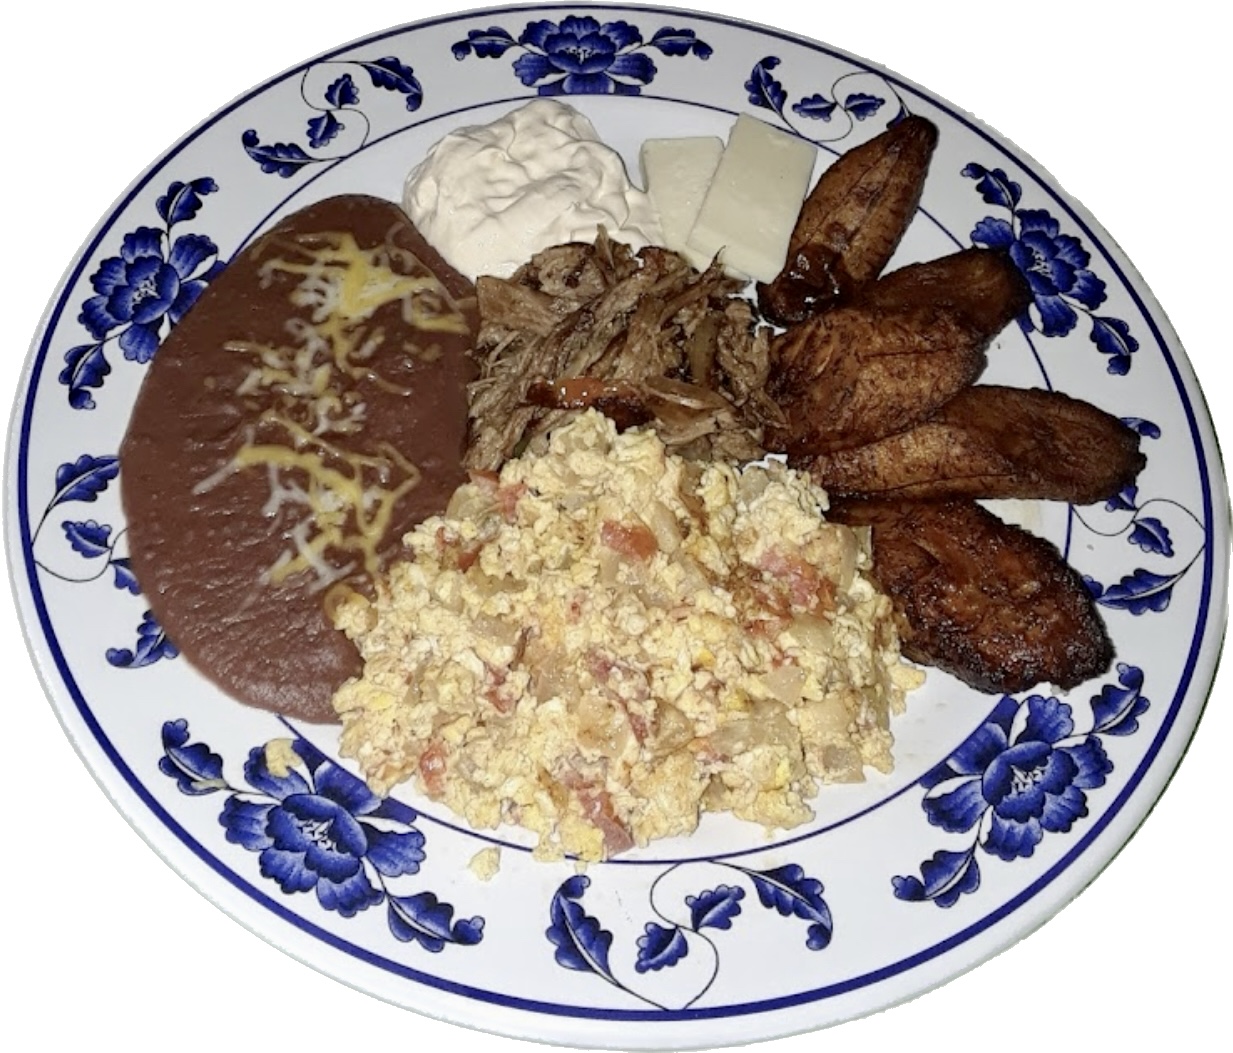 SHREDDED BEEF & FRIED PLANTAIN PLATE